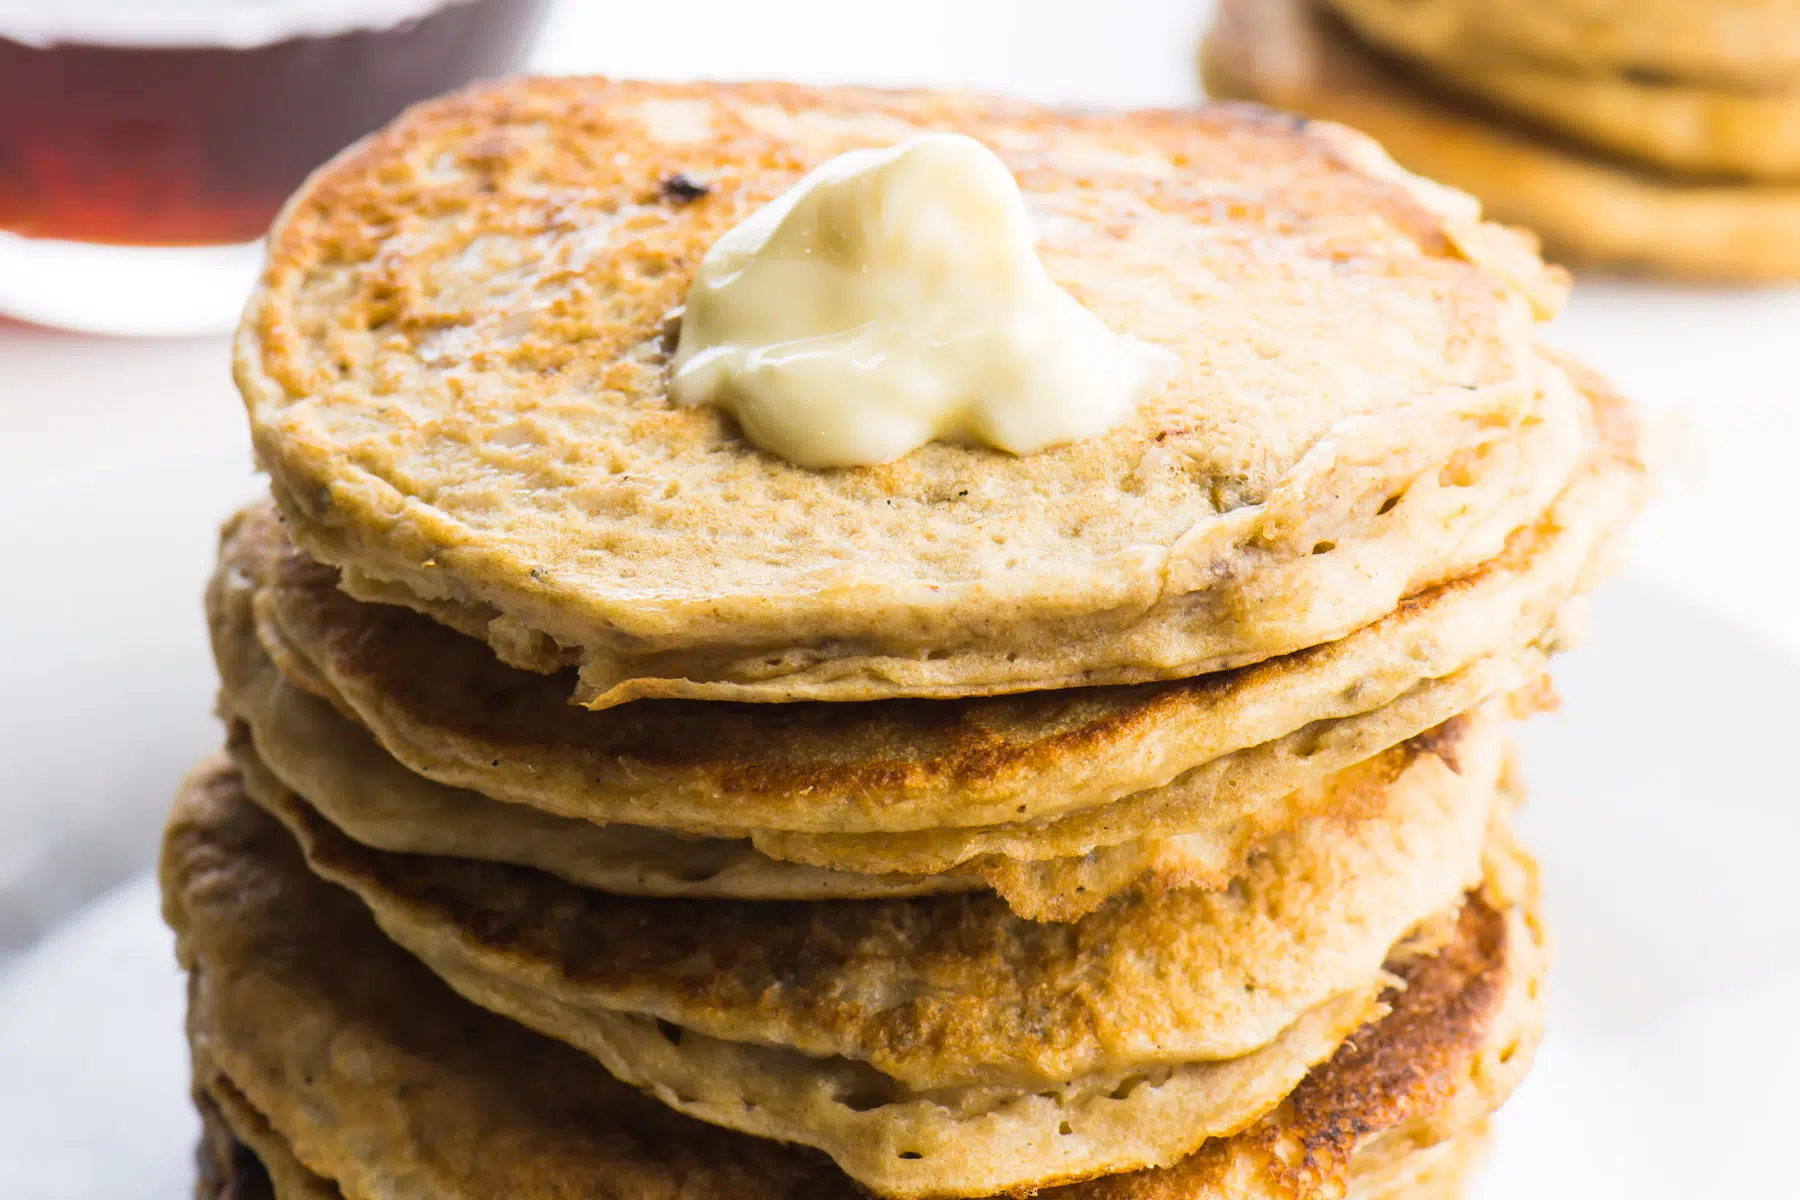 A stack of pancakes sit on a plate with a pat of melted vegan butter on the top. There are more pancakes in the background and a glass pitcher with maple syrup waits to be poured over the top.